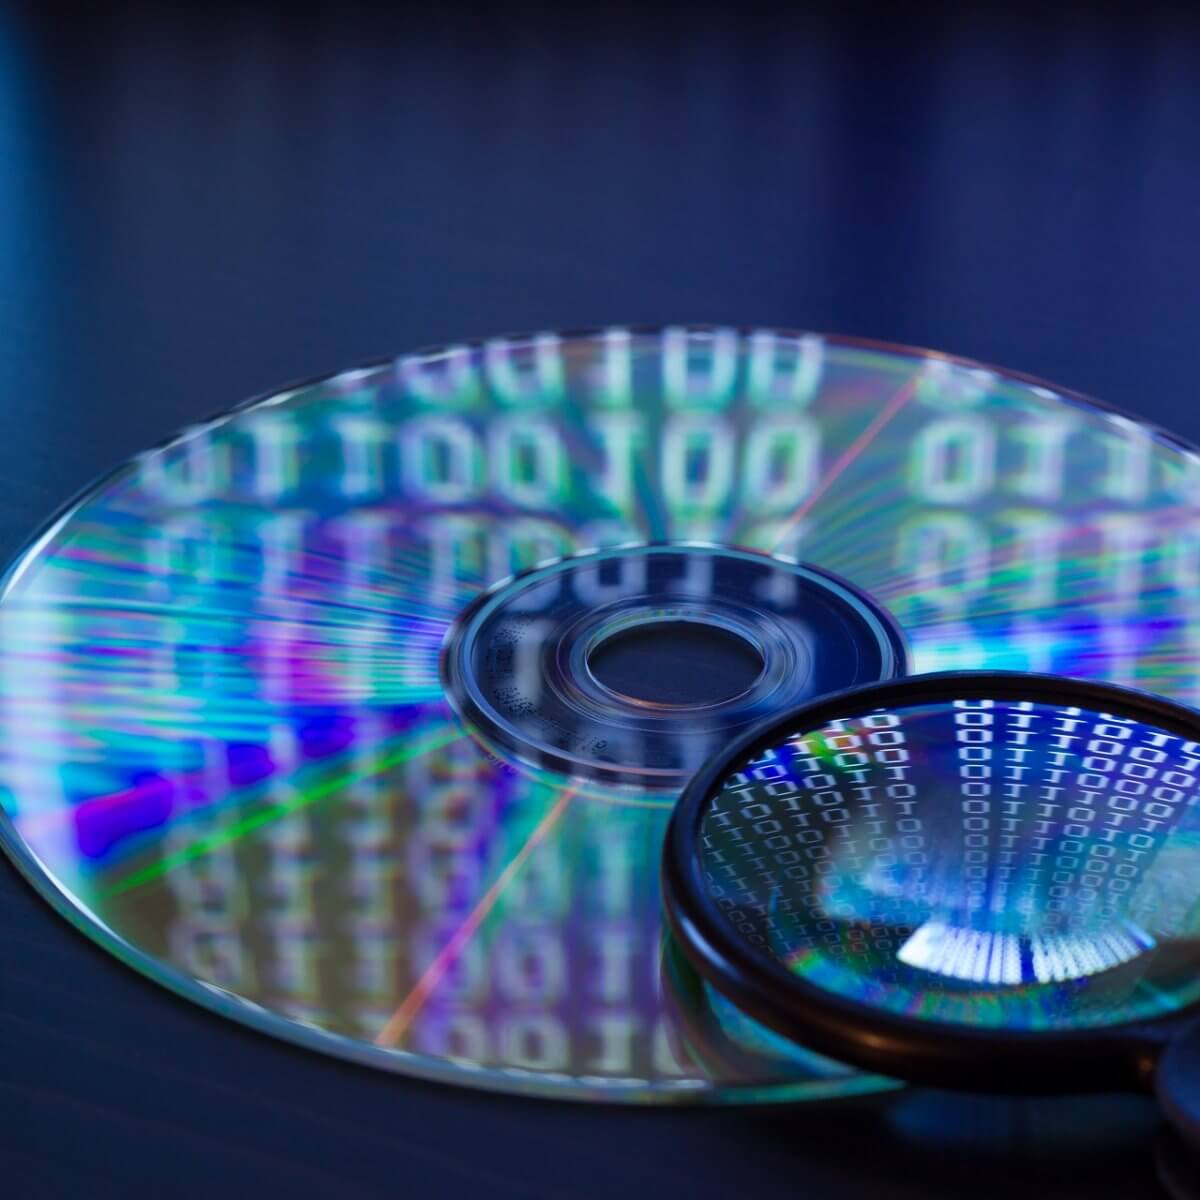 software to watch a blu ray disc for mac